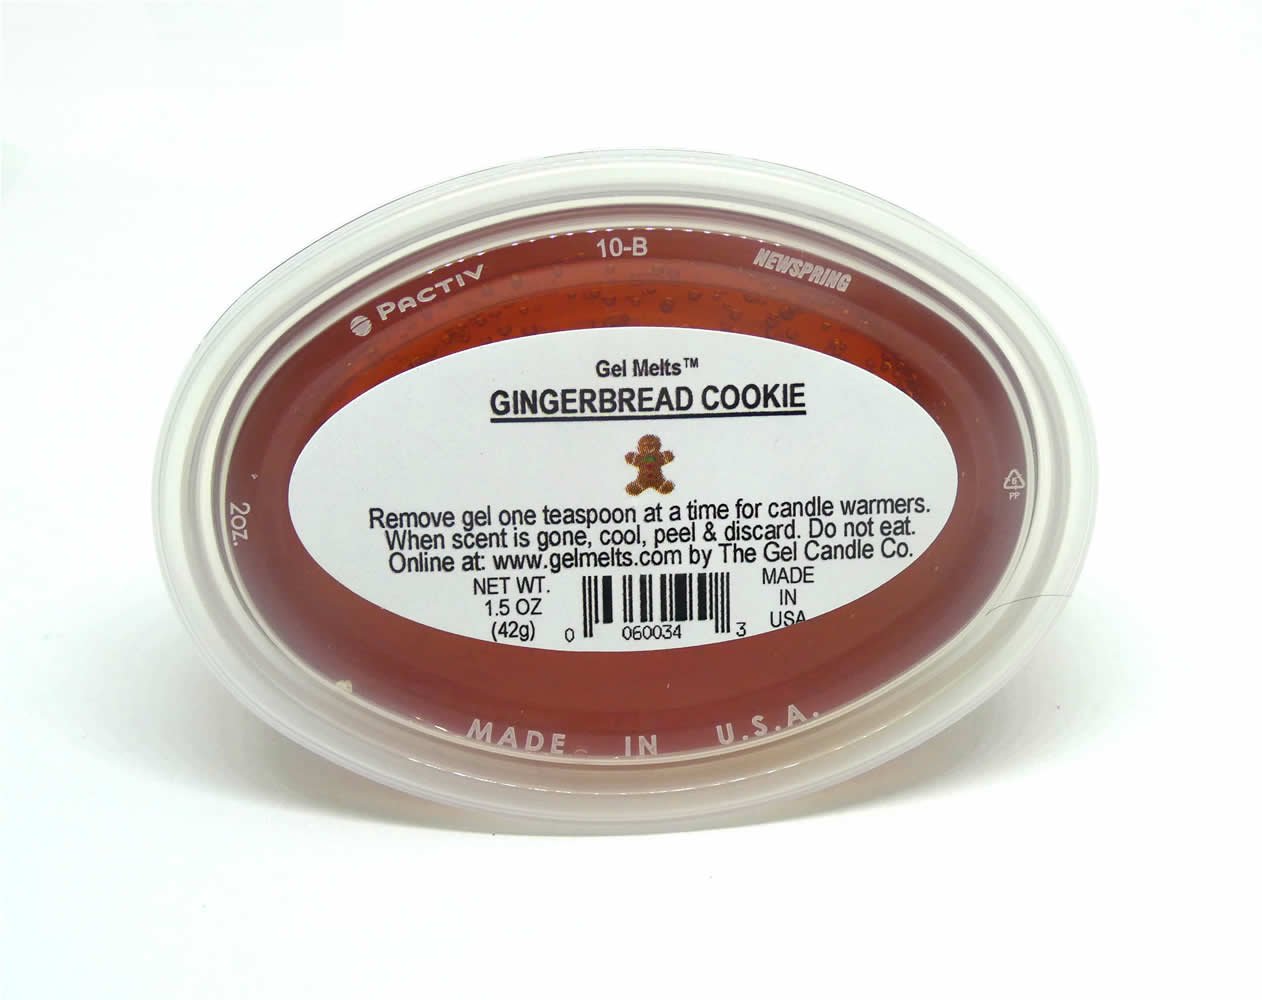 Gingerbread Cookie scented Gel Melts™ for warmers - 3 pack